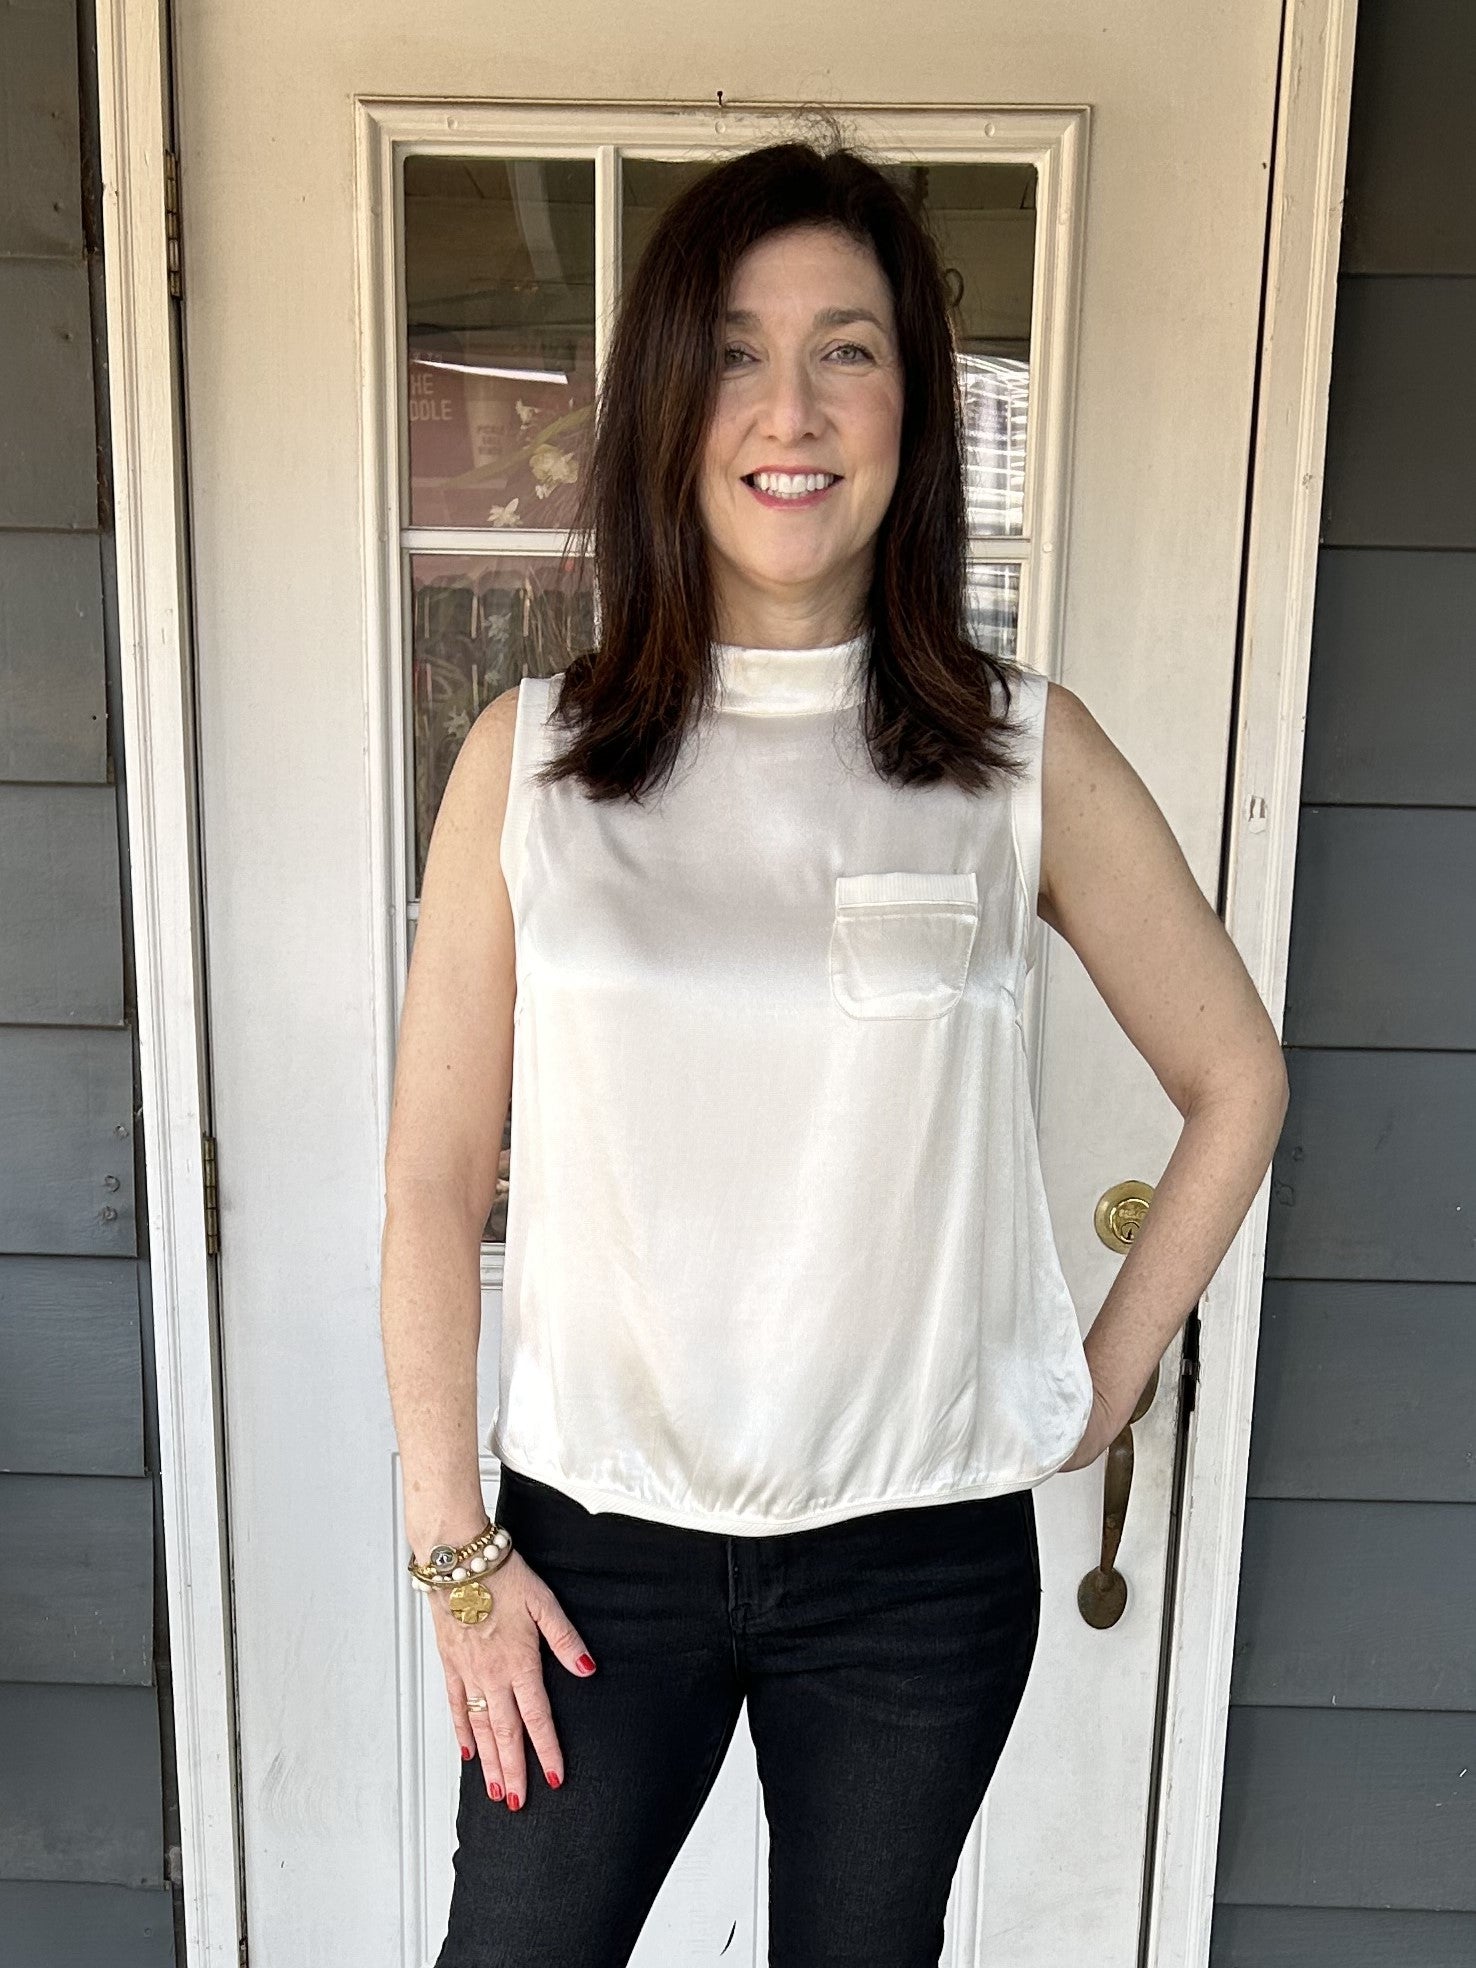 Discover effortless elegance with our Sleeveless Satin Top in a stunning cream color. The silky and soft material brings both comfort and luxury, making it a staple in your wardrobe. Perfectly accented with ribbed trim and a back button closure, this top is sure to make you feel pretty.  Material: 100% Viscose; Trim: 95% Cotton/ 5% Spandex&nbsp;  Care Instructions: Hand wash cold, hand to dry